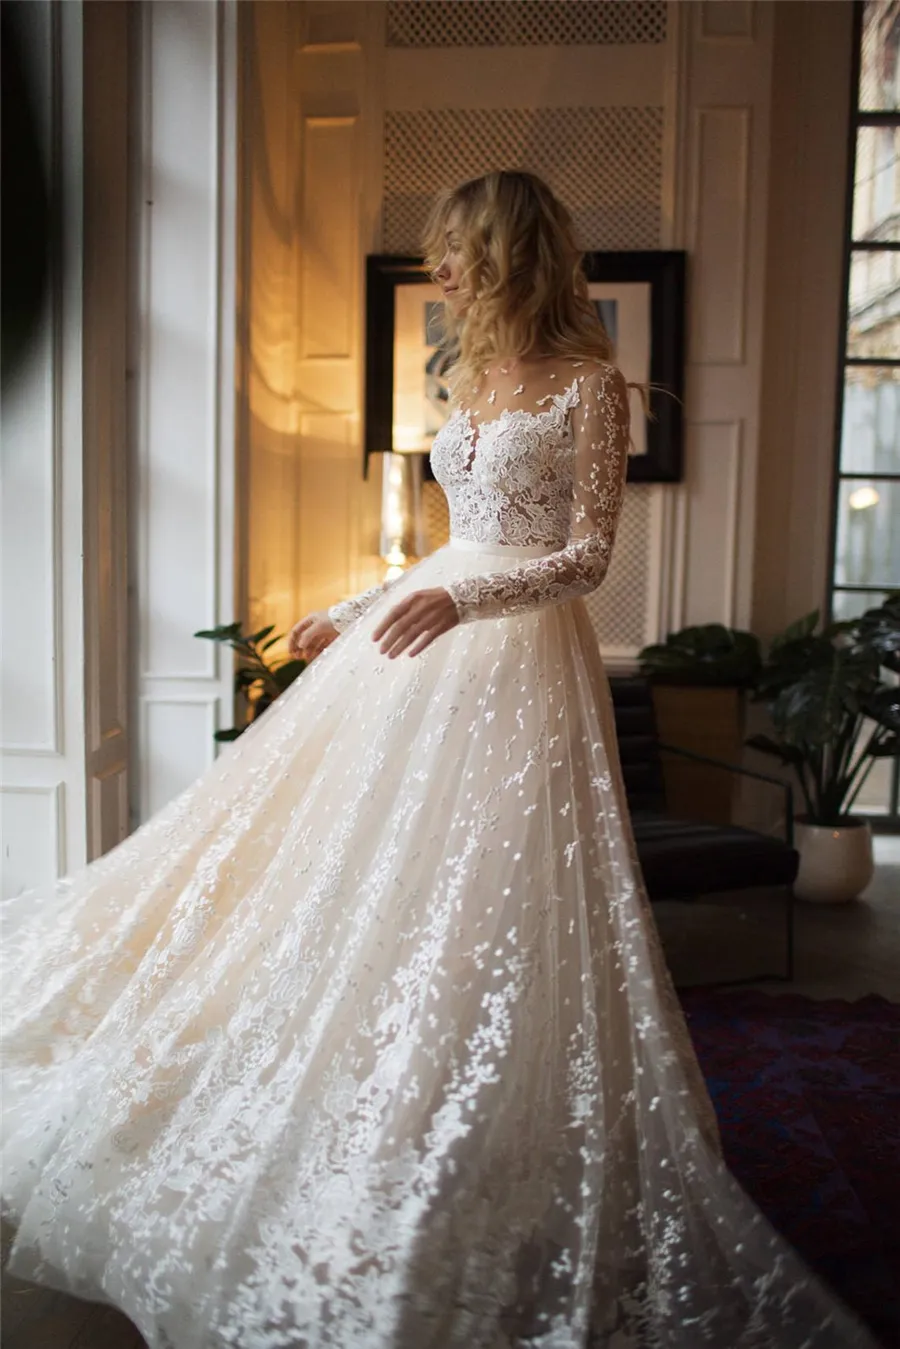 Lace Long Sleeves Wedding Dresses 2021 Jewel Neck Sexy Open Back Tulle Applique Fashion Bridal Dress vestidos noiva A Line Wedding Gowns